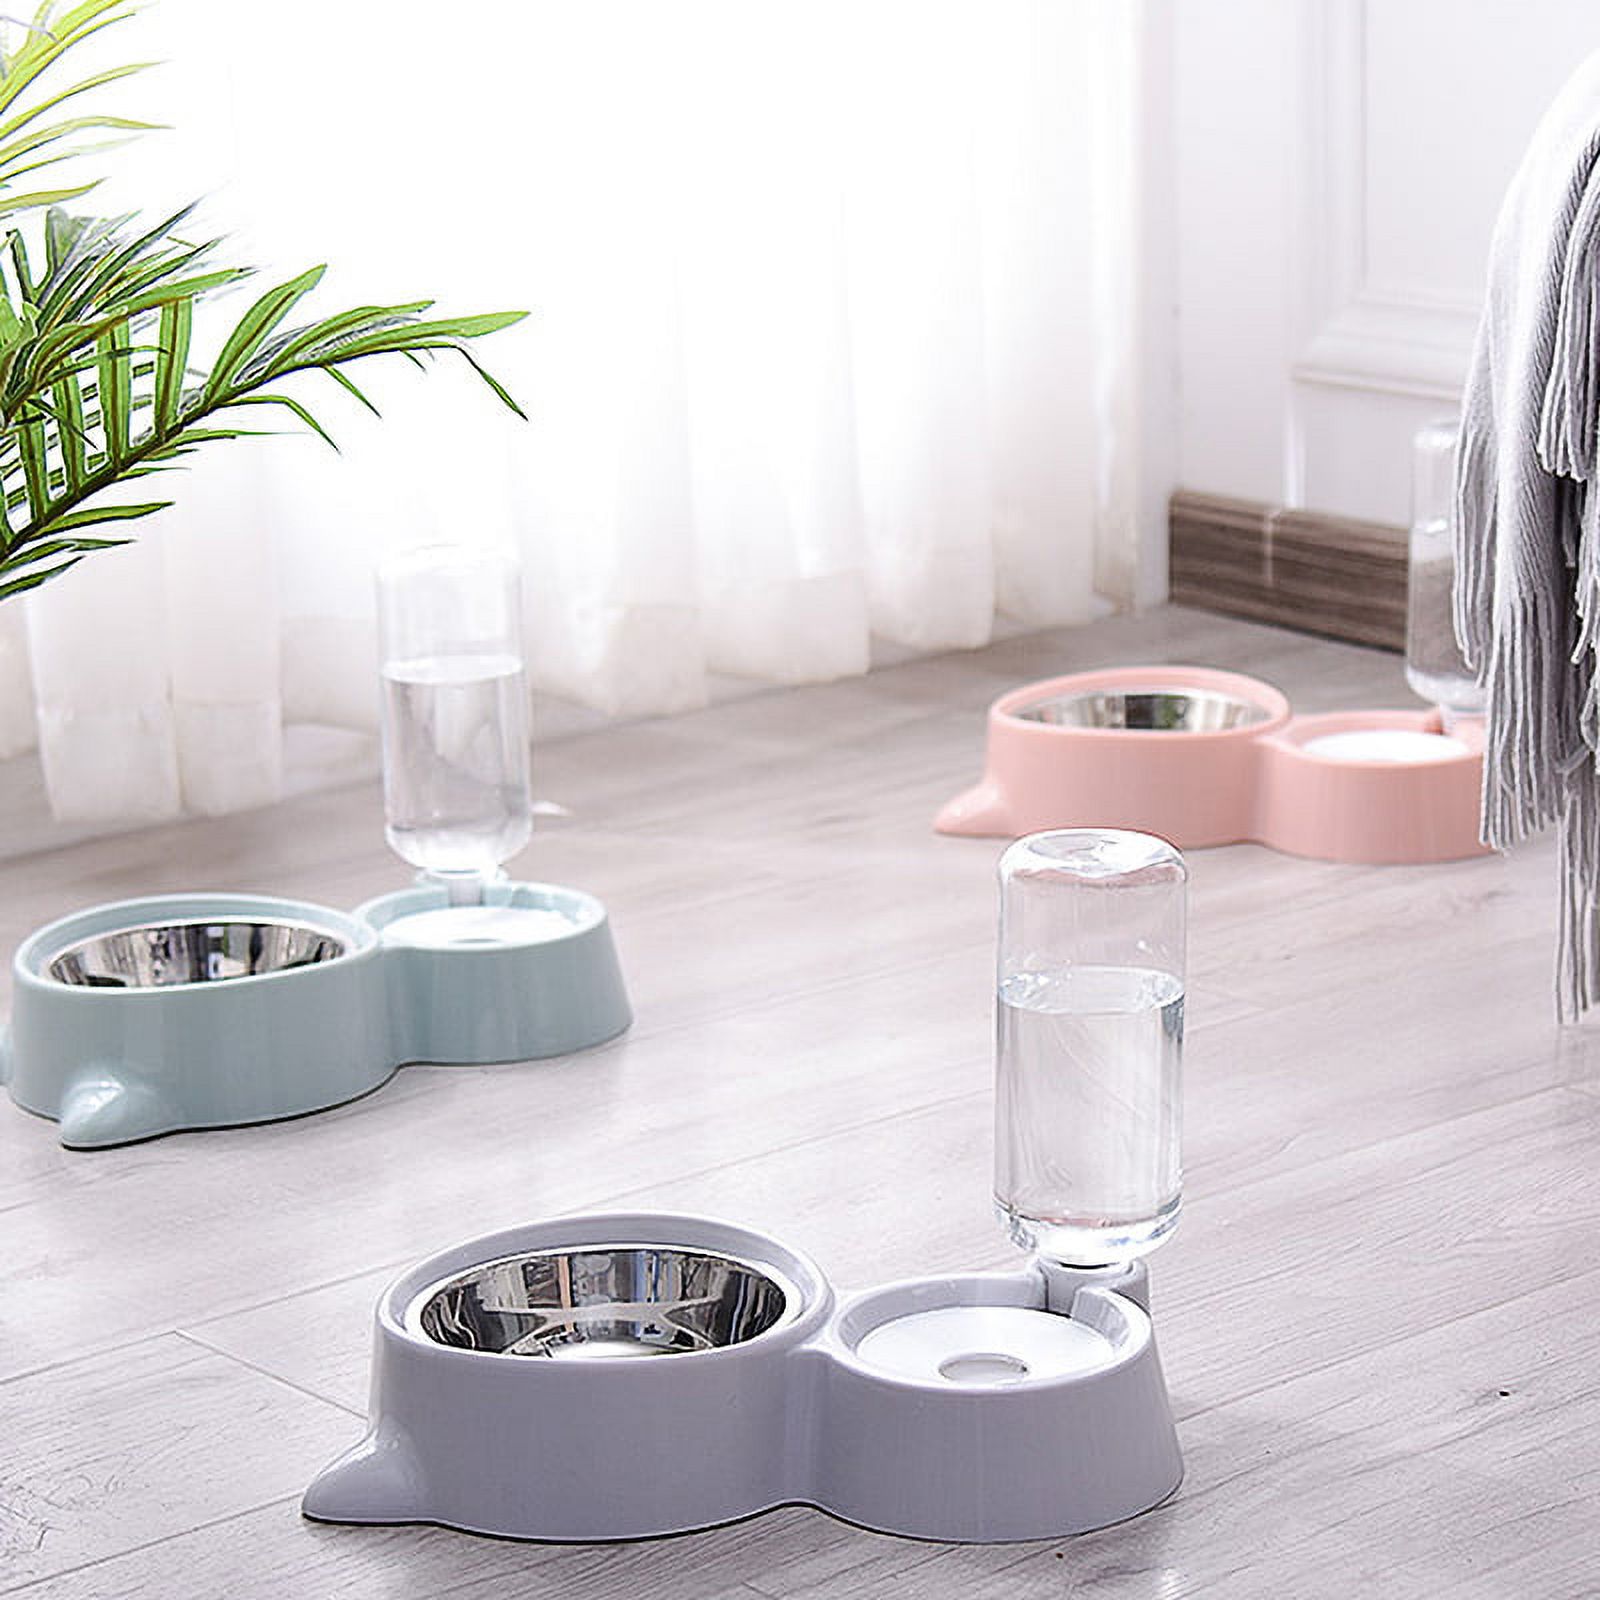 Automatic Pet Feeder Water Dispenser Cat Dog Drinking Bowl Dogs Feeder Dish Double Bowl;Automatic Pet Feeder Water Dispenser Cat Dog Drinking Bowl Dogs Feeder Dish - image 4 of 8